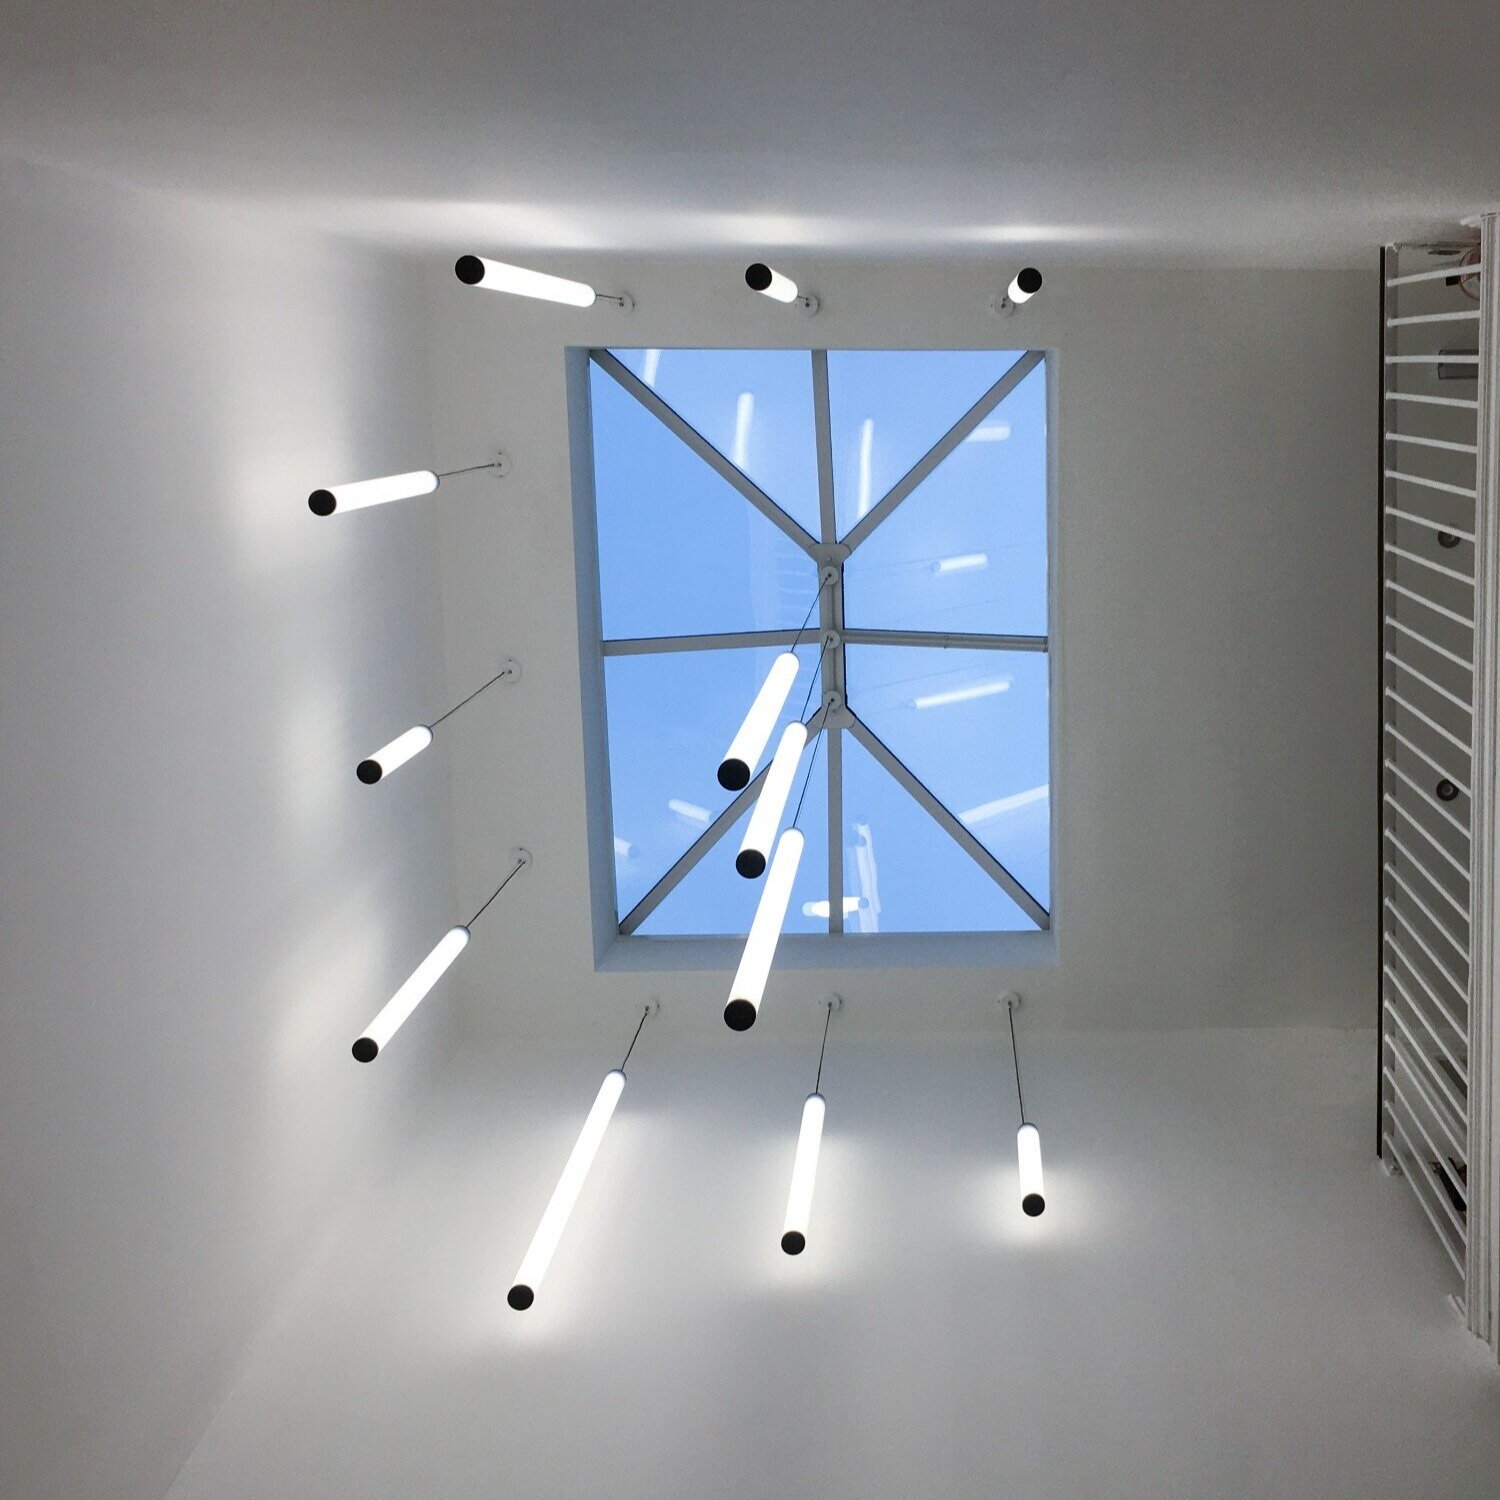 Architectural feature lighting for a CAT A office fitout at 9 Portland Square, Bristol.